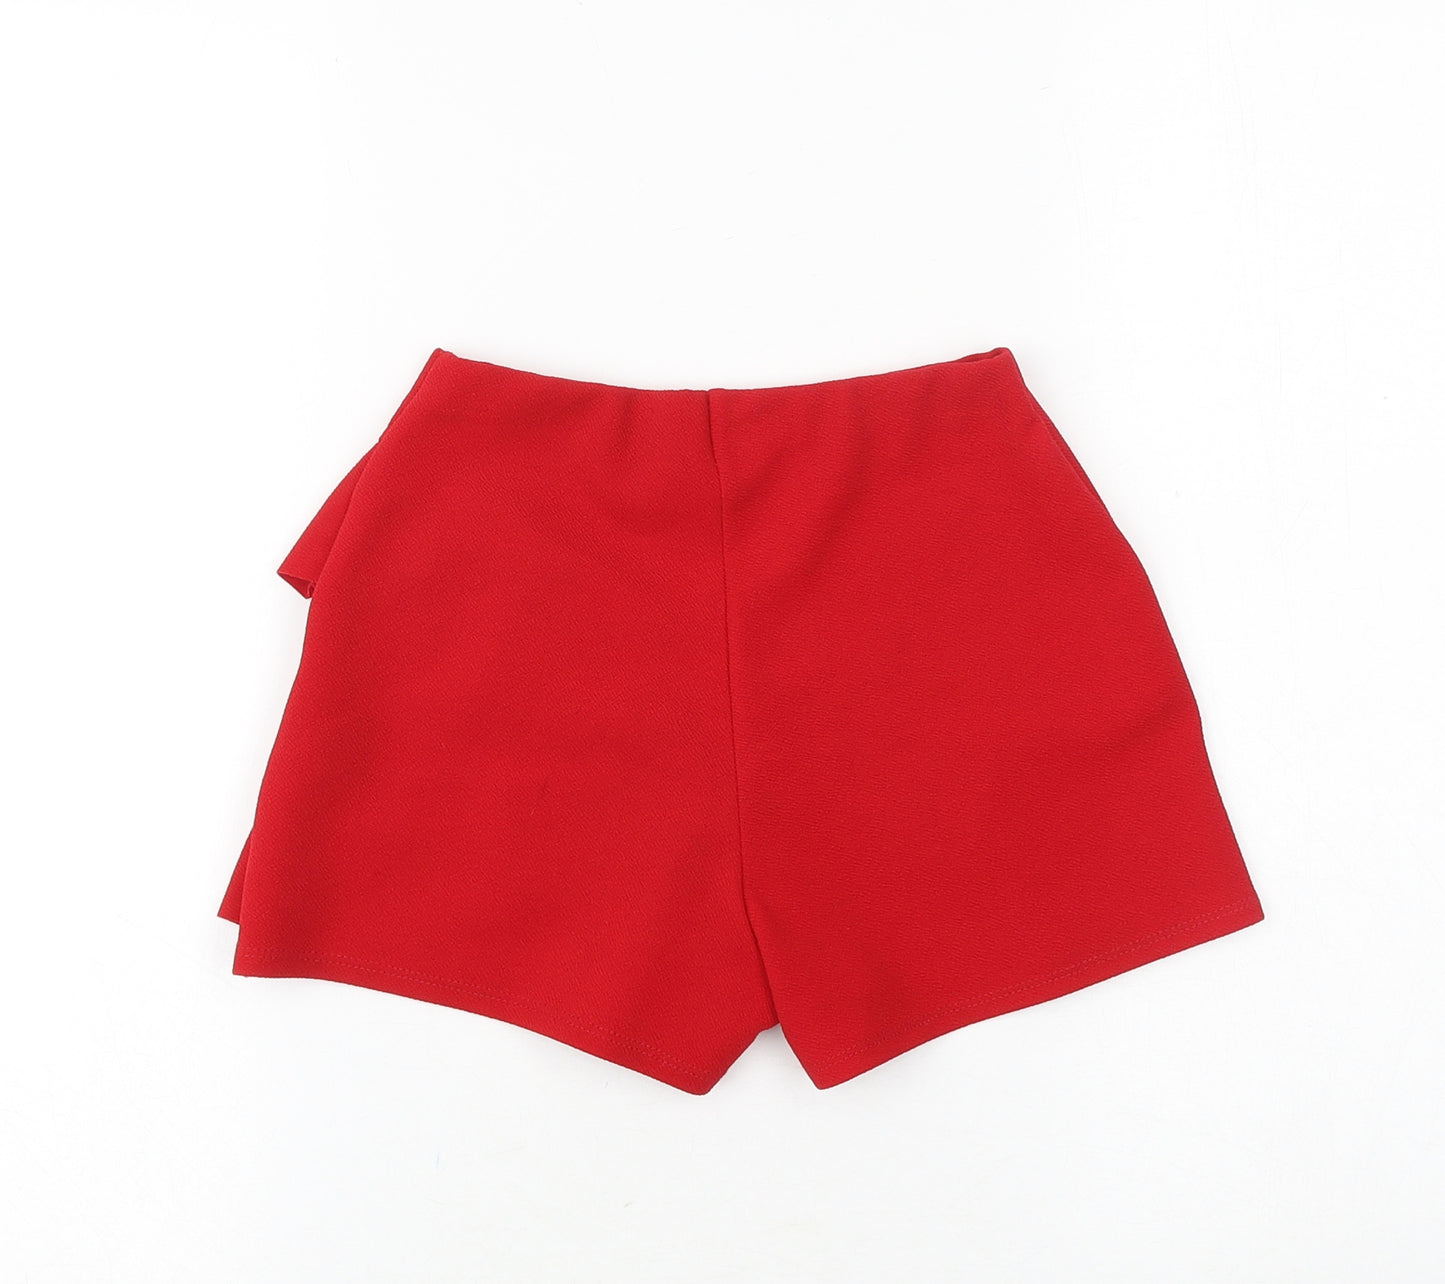 Candy Couture Girls Red Polyester Boyfriend Shorts Size 9 Years Regular